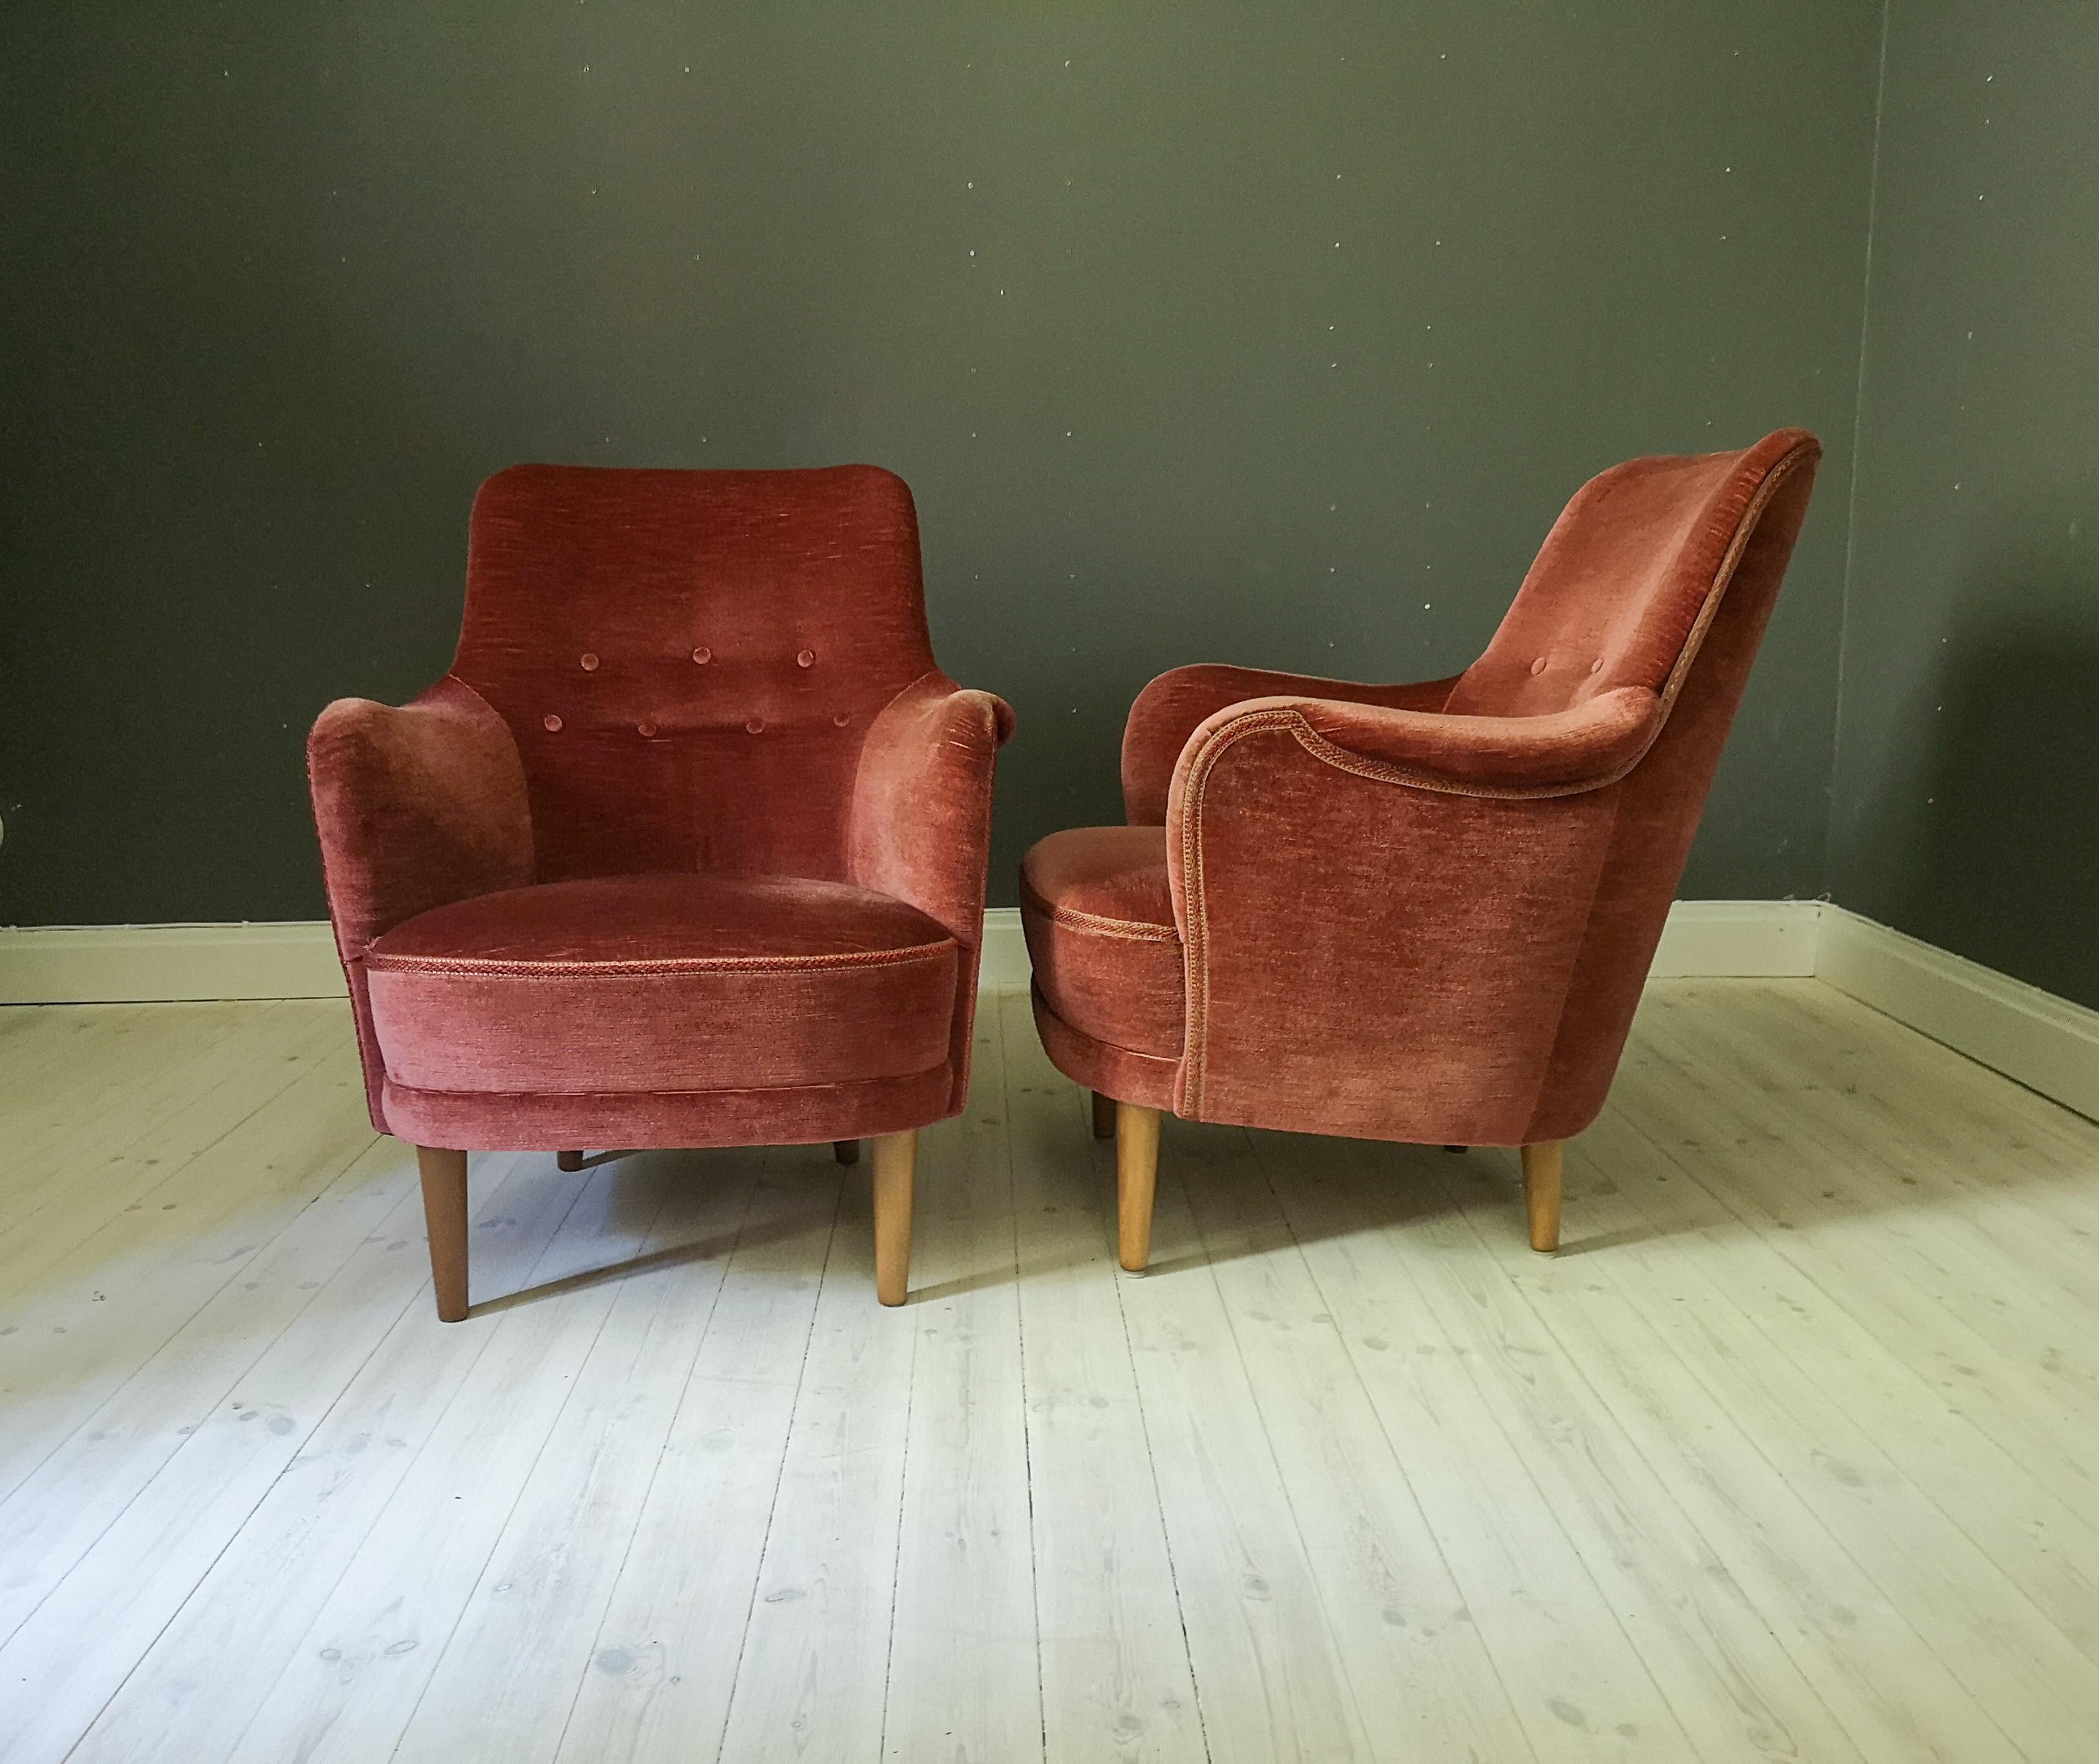 These midcentury icon chairs were designed by Carl Malmsten and this one was produced by O.H Sjögren. The chairs have a rare fabric in shifting red/pink velvet.

 It’s in very good vintage condition, the armrests are the only thing that looks used